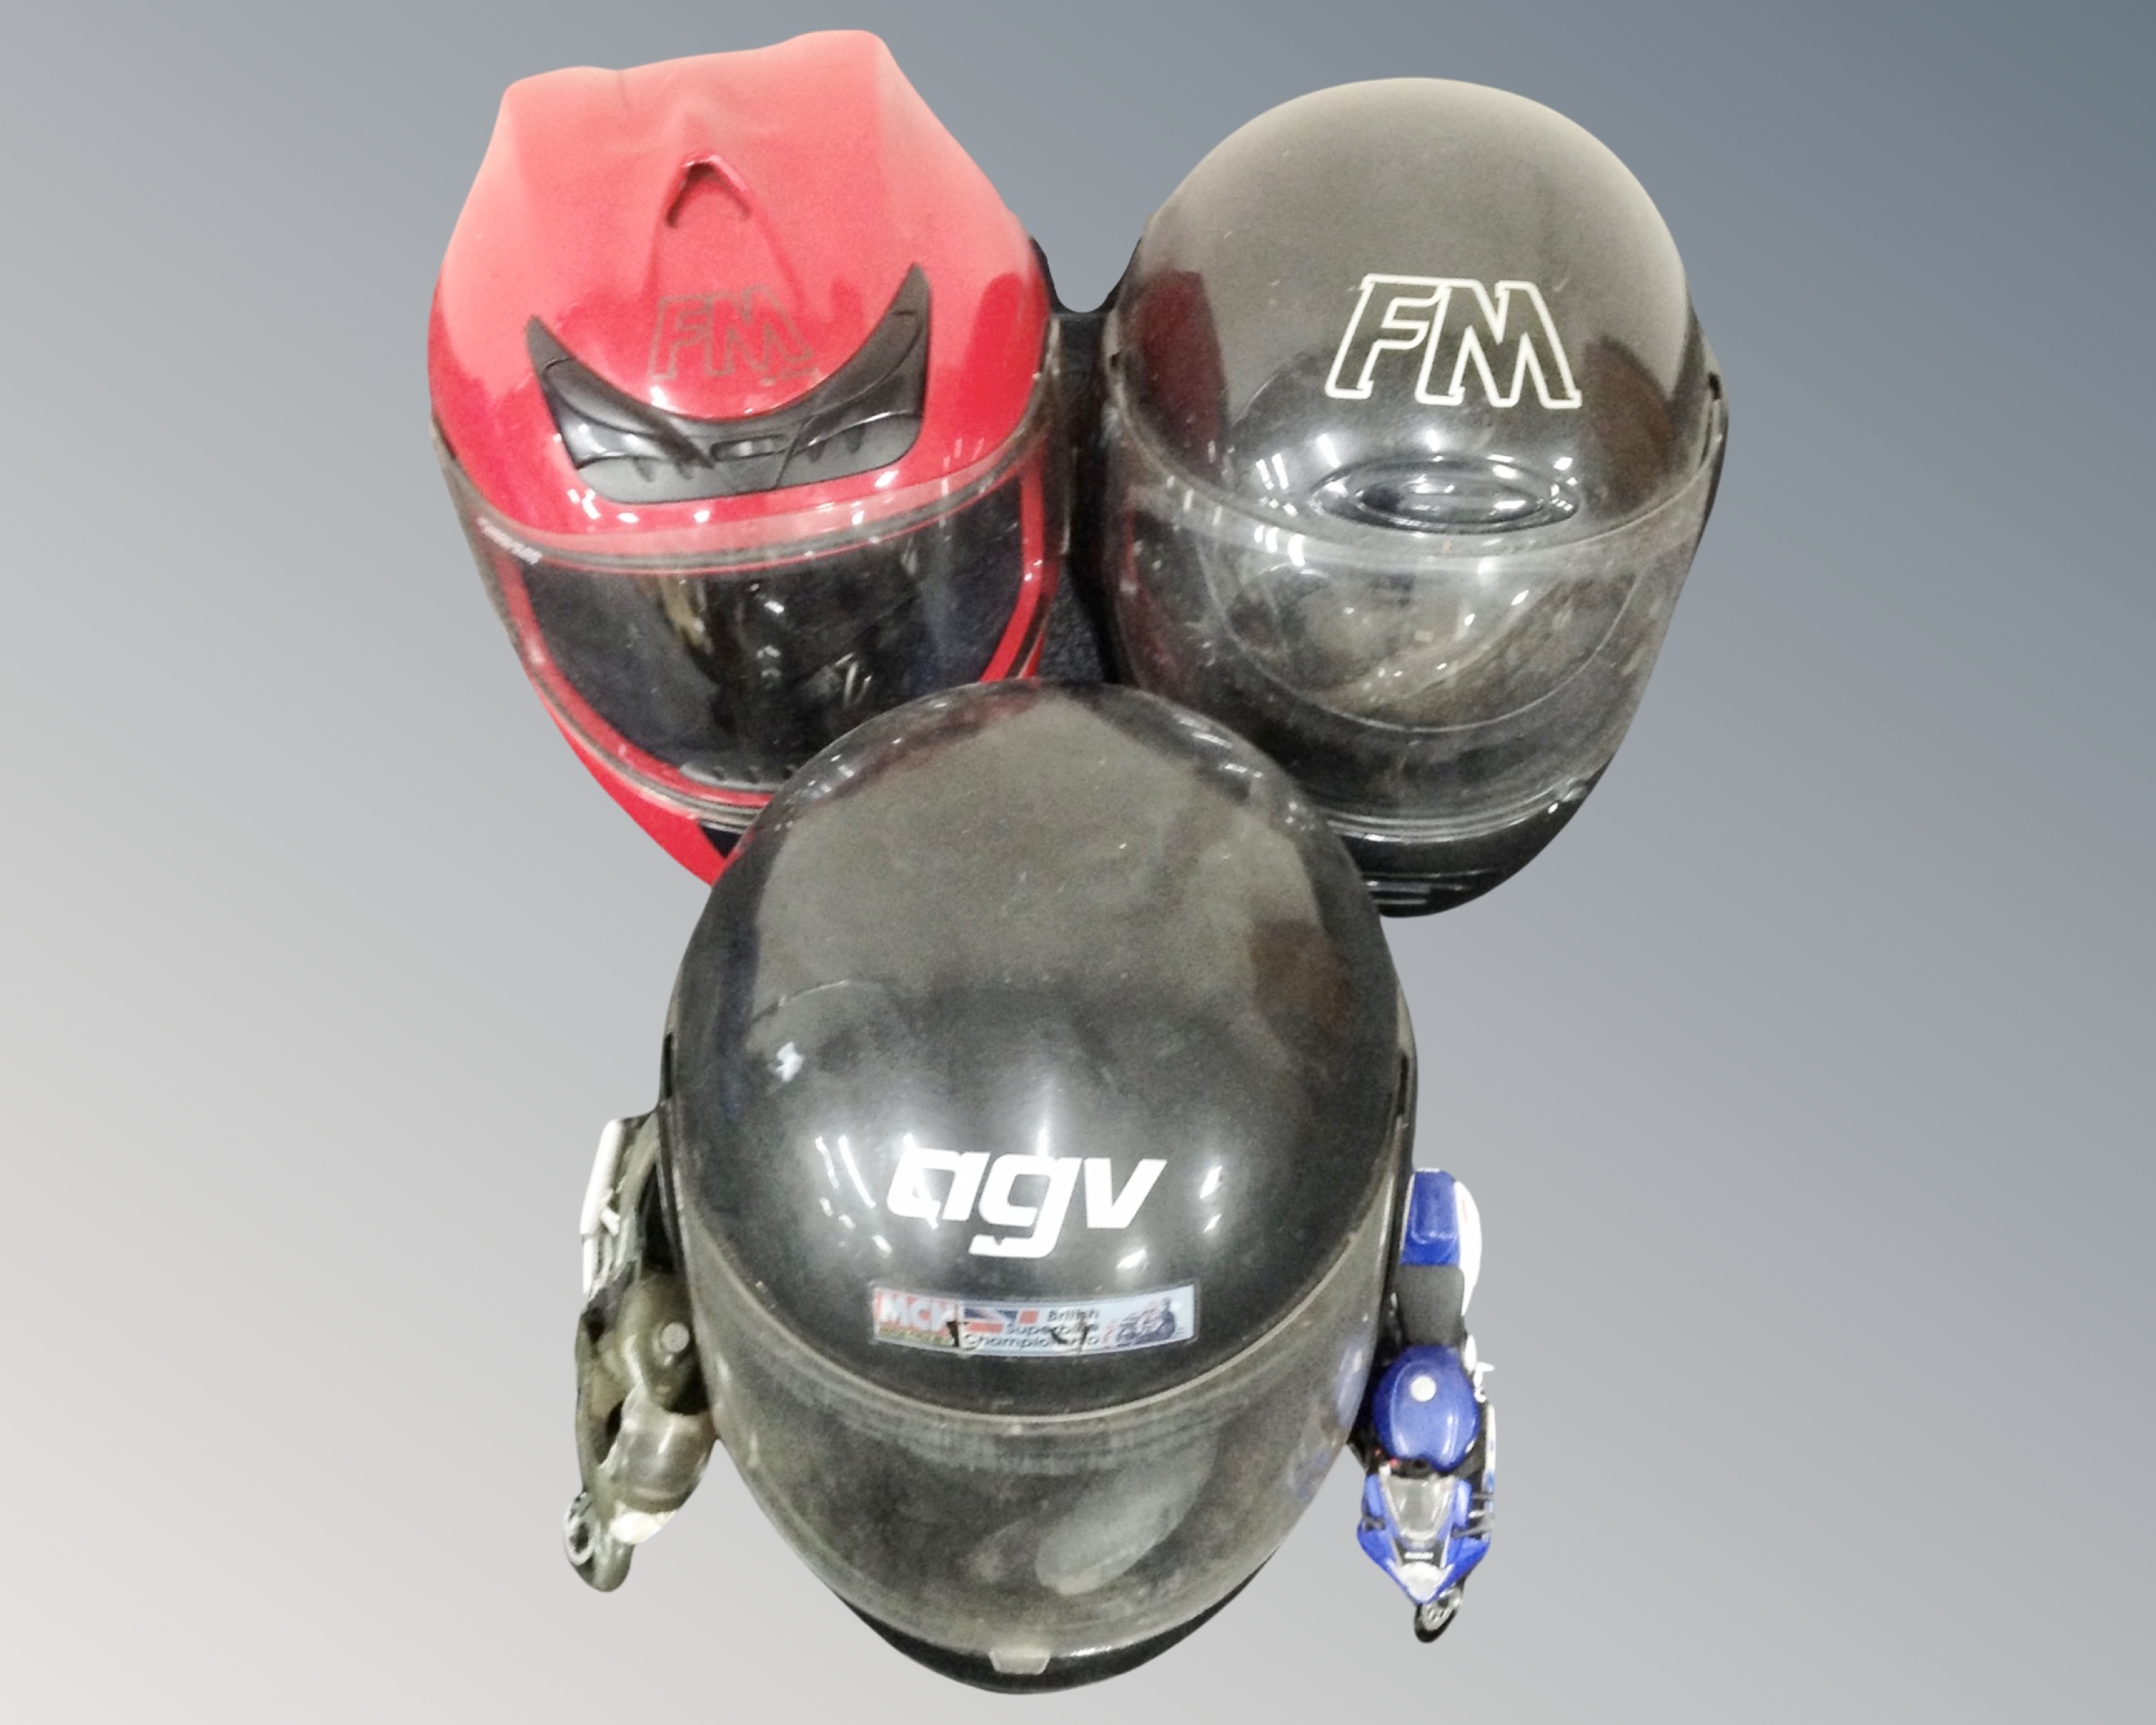 Three motorcycle helmets together with two motorcycle toys